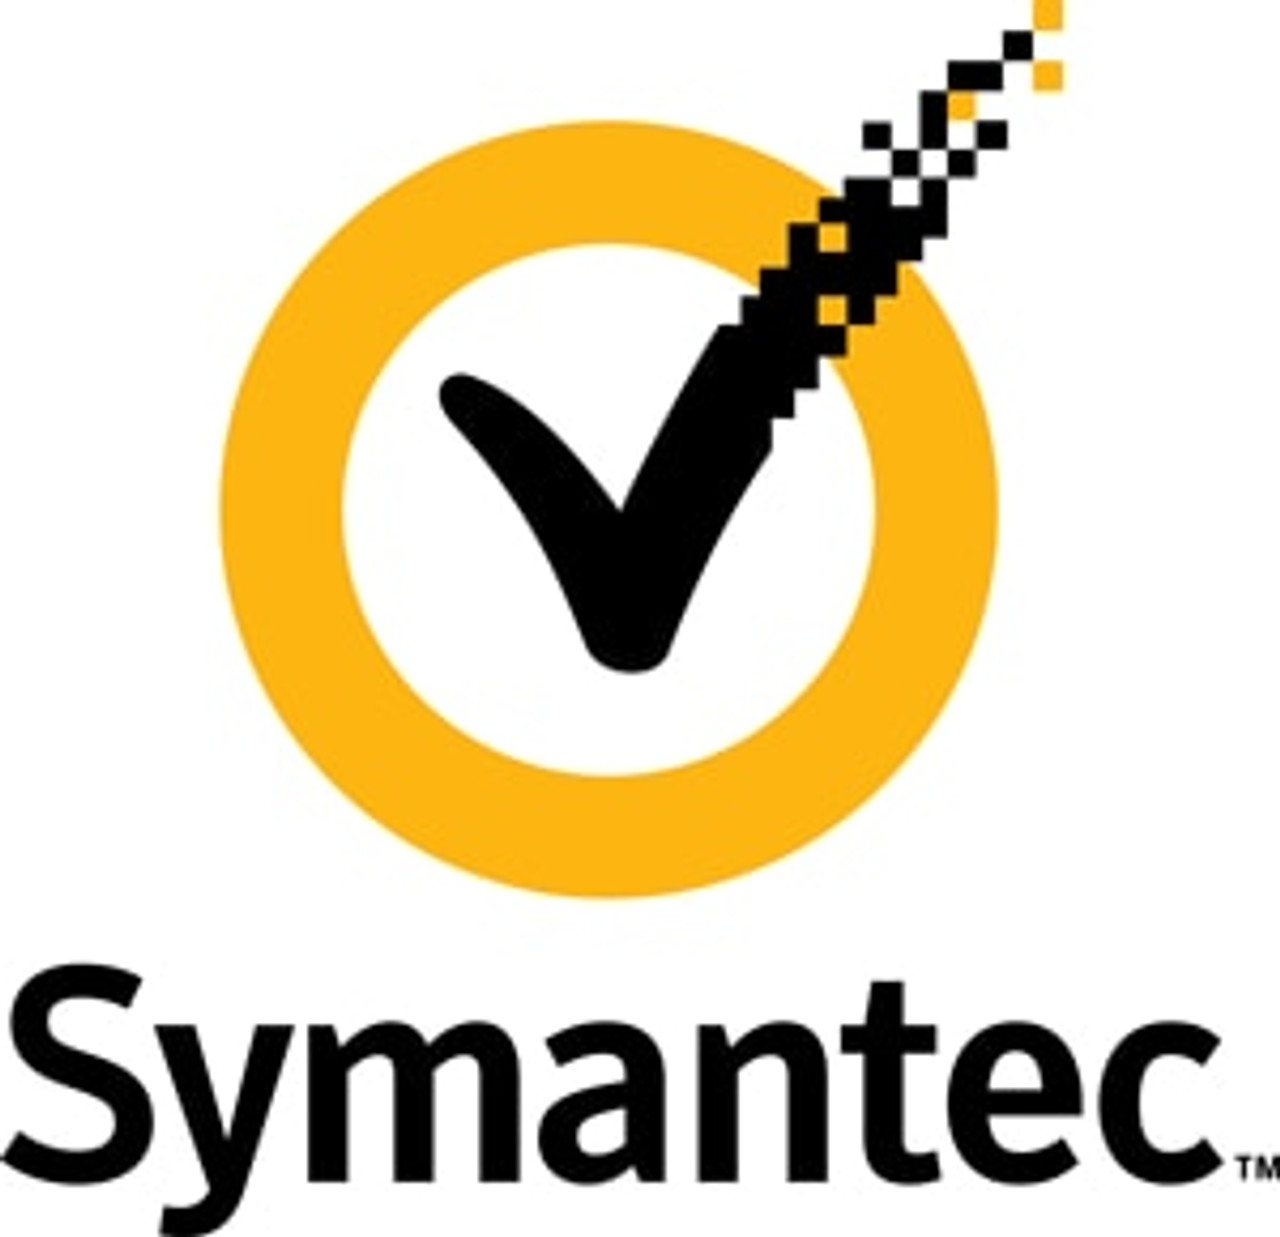 Symantec Industrial Control System Protection Service OEM (ICSP SW, AV), Includes SIPSS, Initial Subscription License with Support, 250 Drivers 1 YR